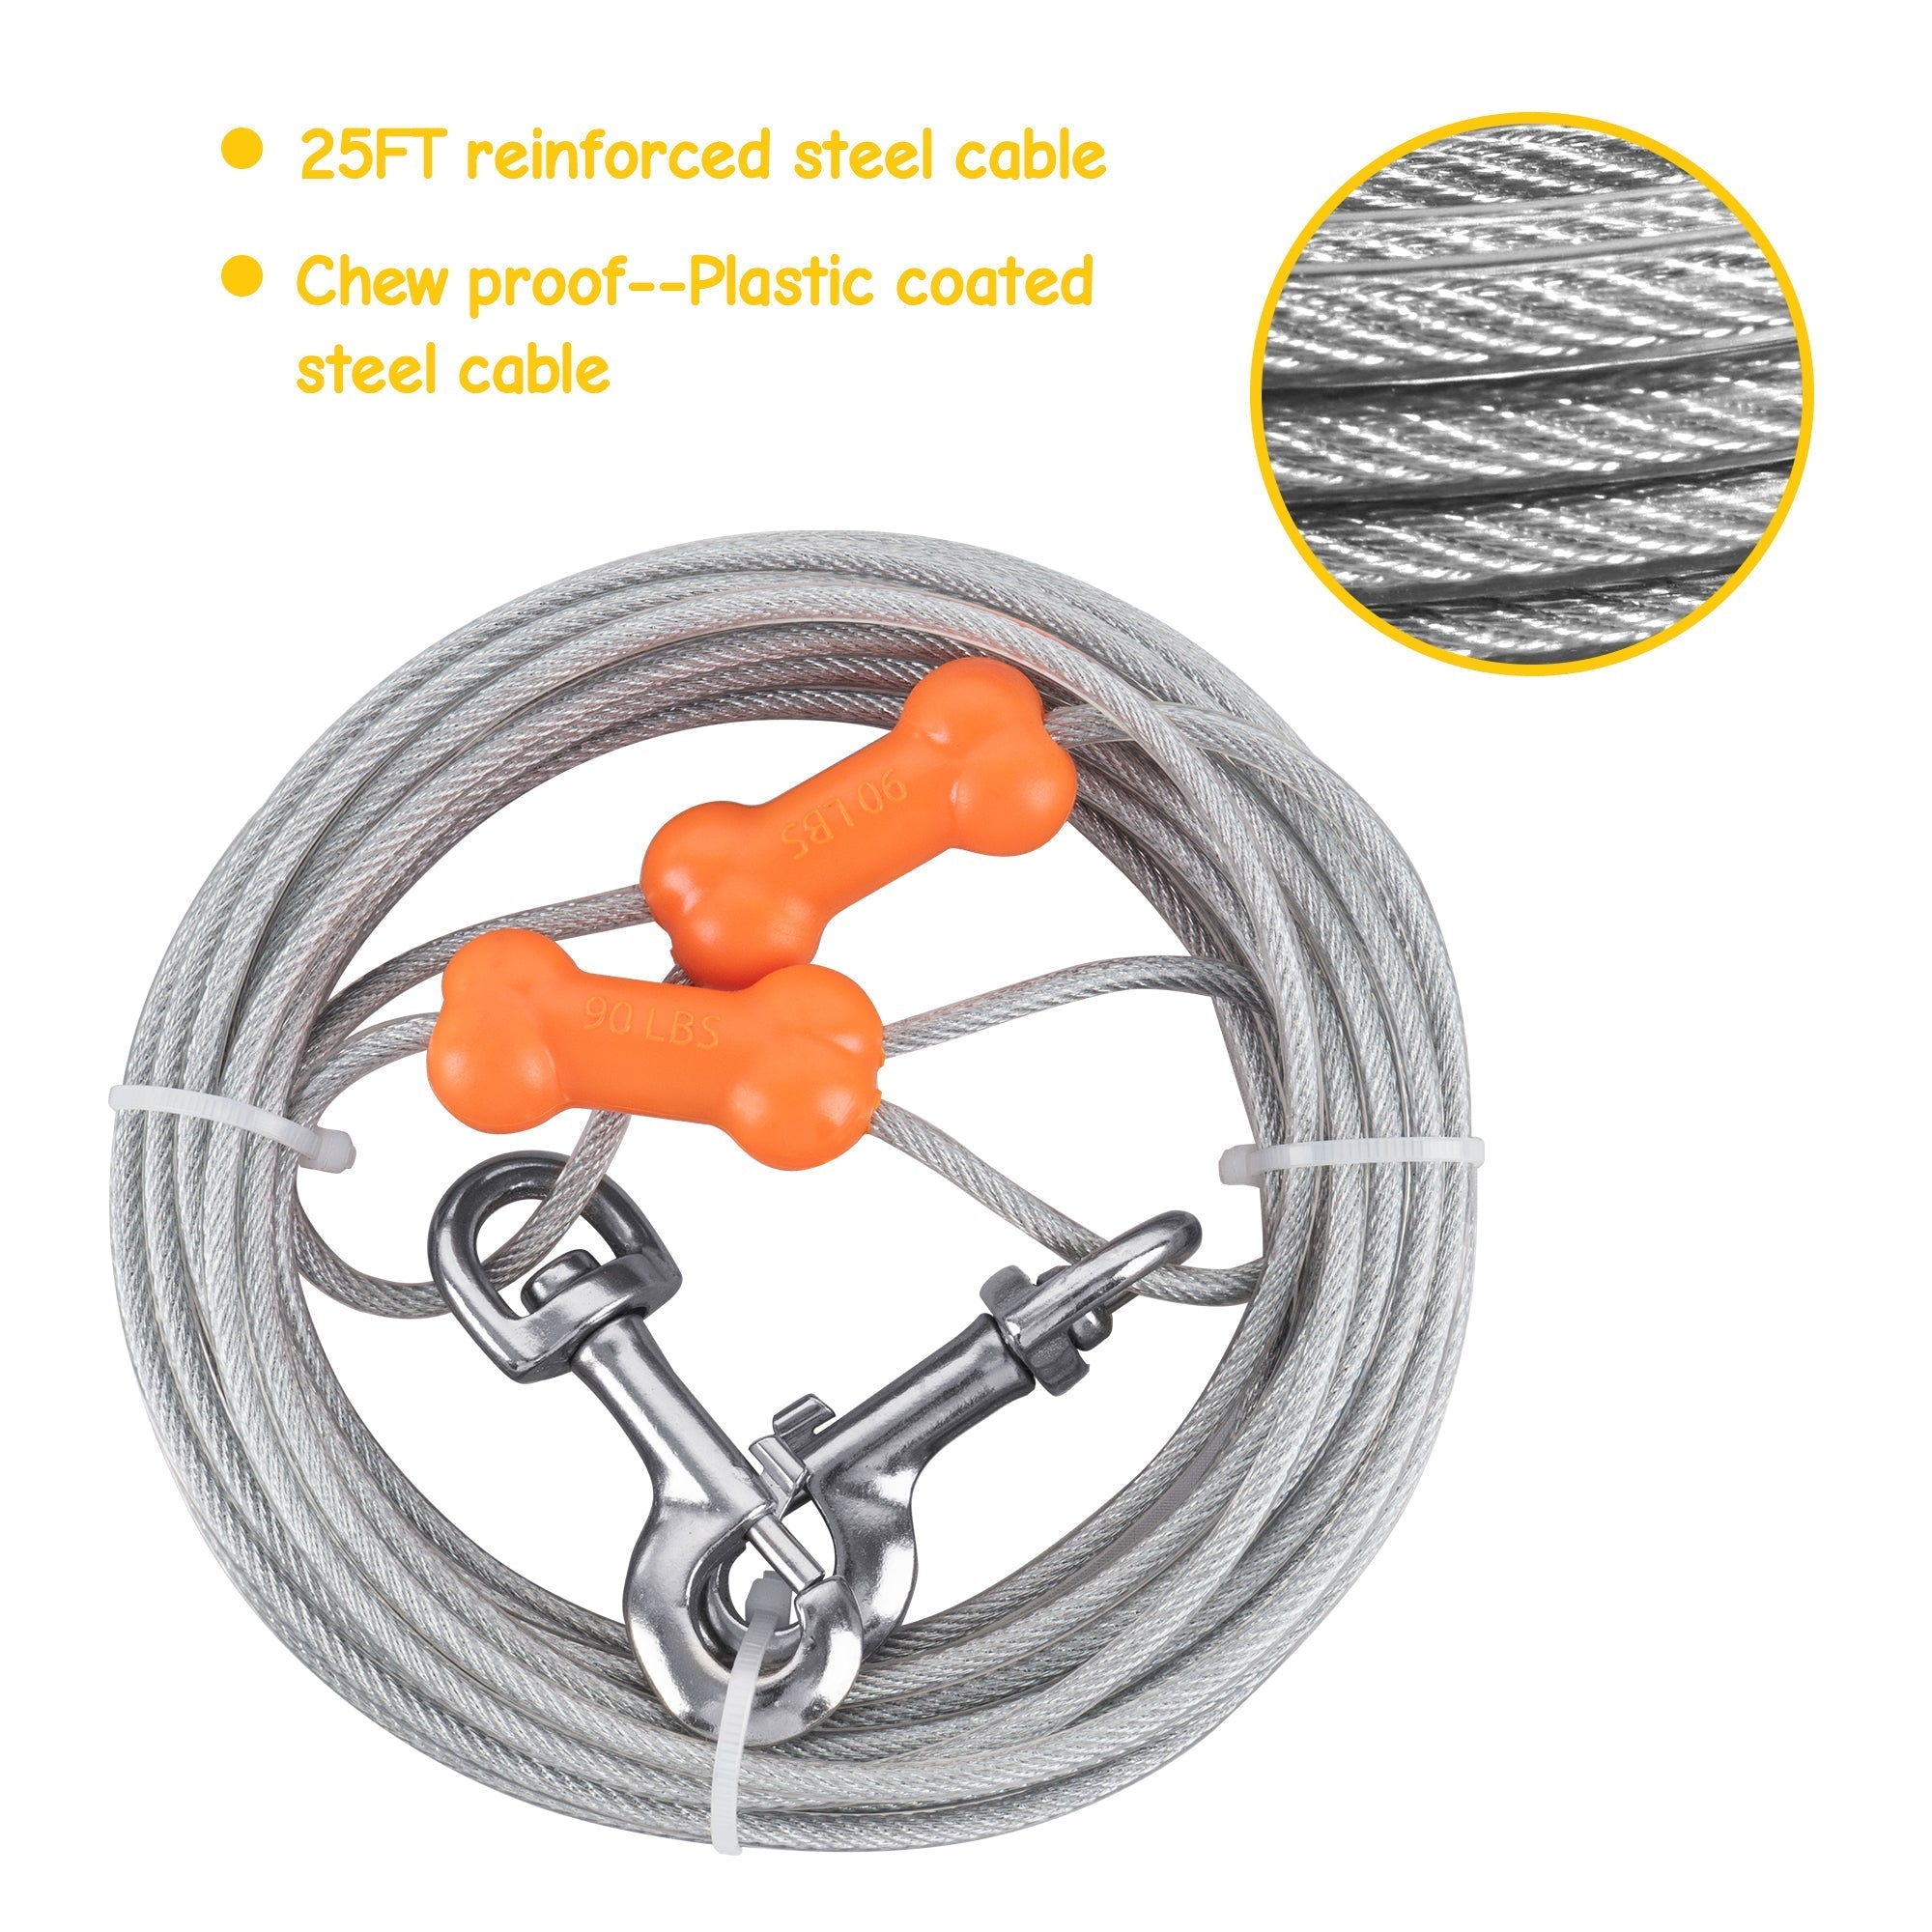 Reflective Vinyl-Covered Tie-Out Cable & Spiral Stake - Heavy Duty